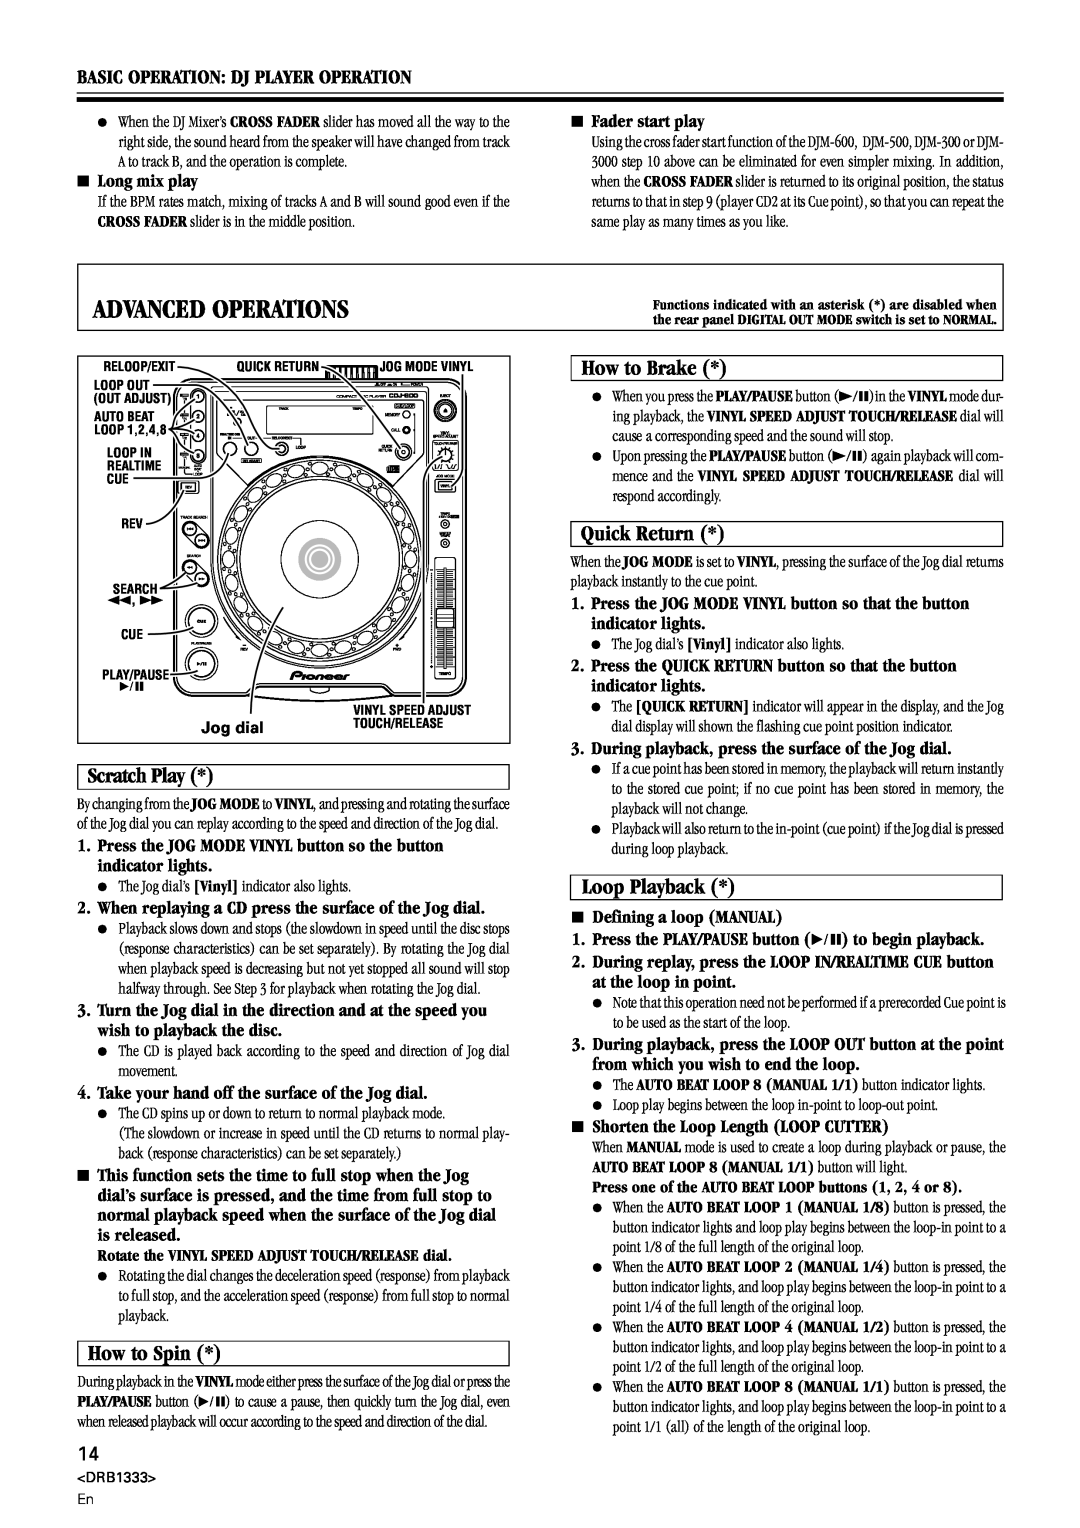 Pioneer CDJ-800 manual Advanced Operations, How to Brake, Quick Return, Scratch Play, How to Spin, Loop Playback 